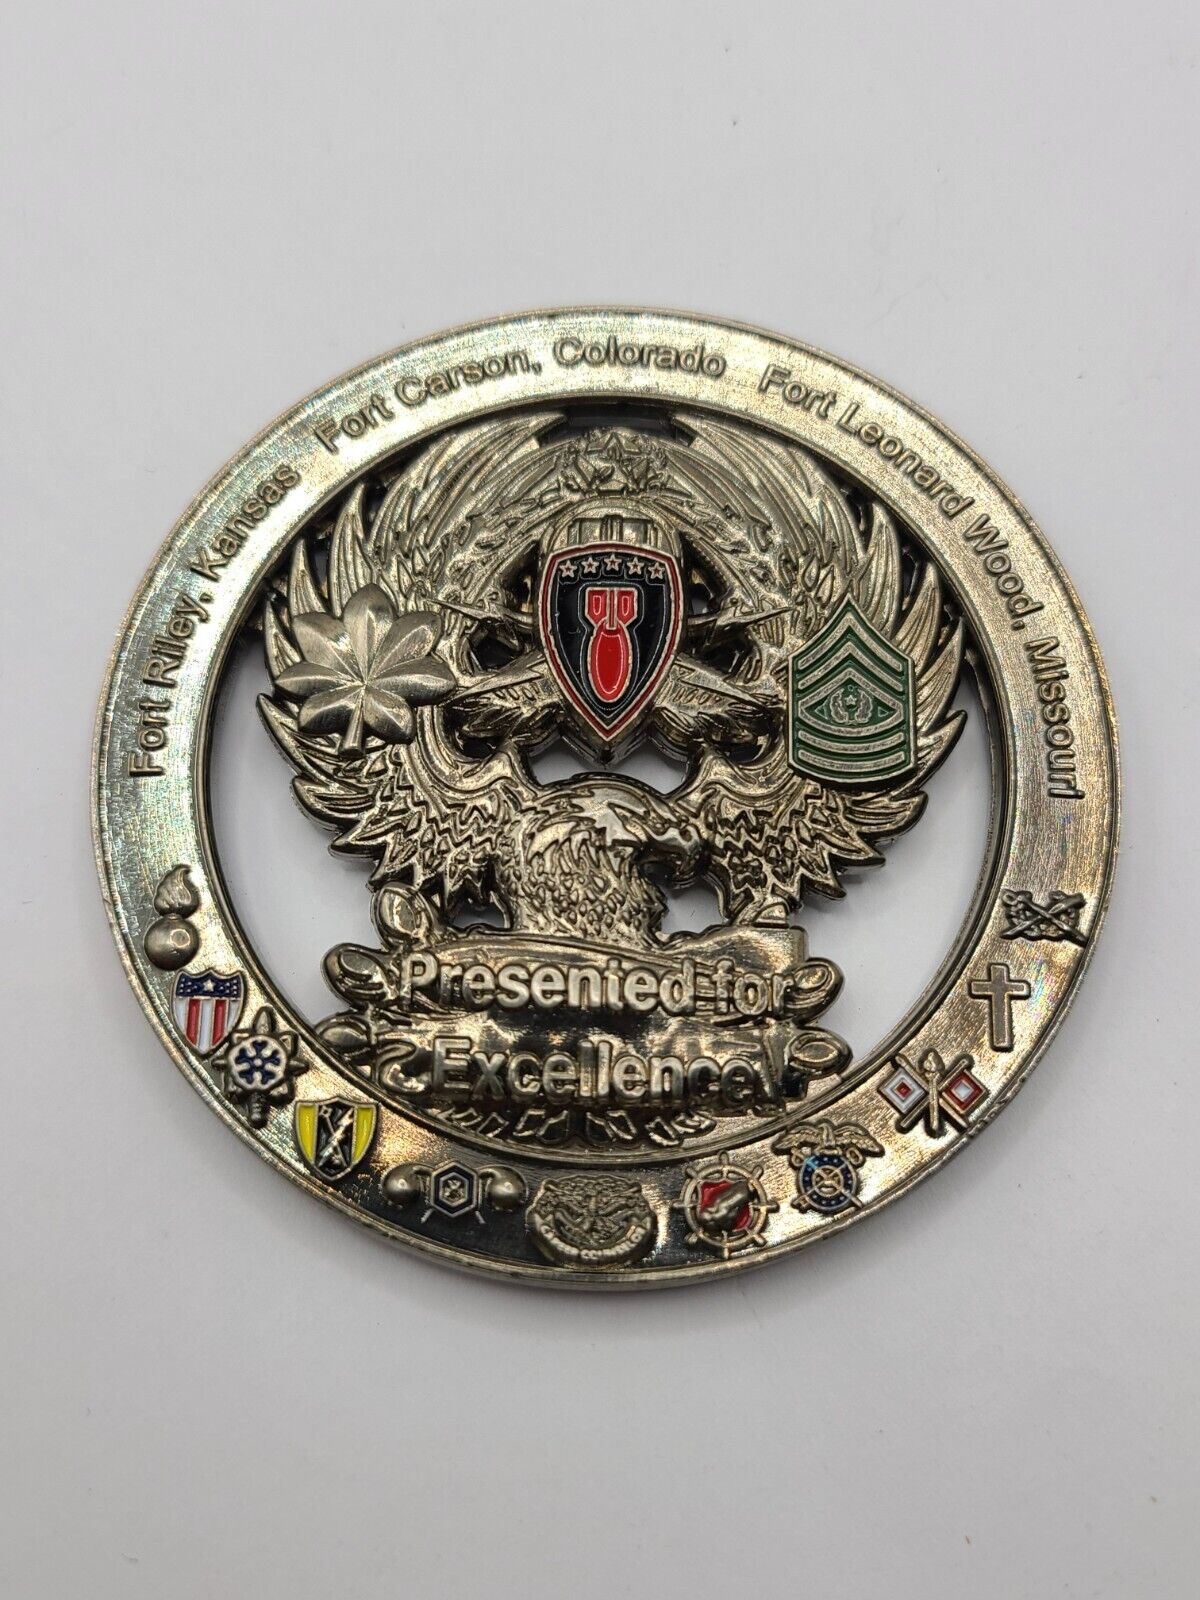 774th EOD CO 764th EOD CO 749th EOD CO Army Presented For Excellence Coin (READ)